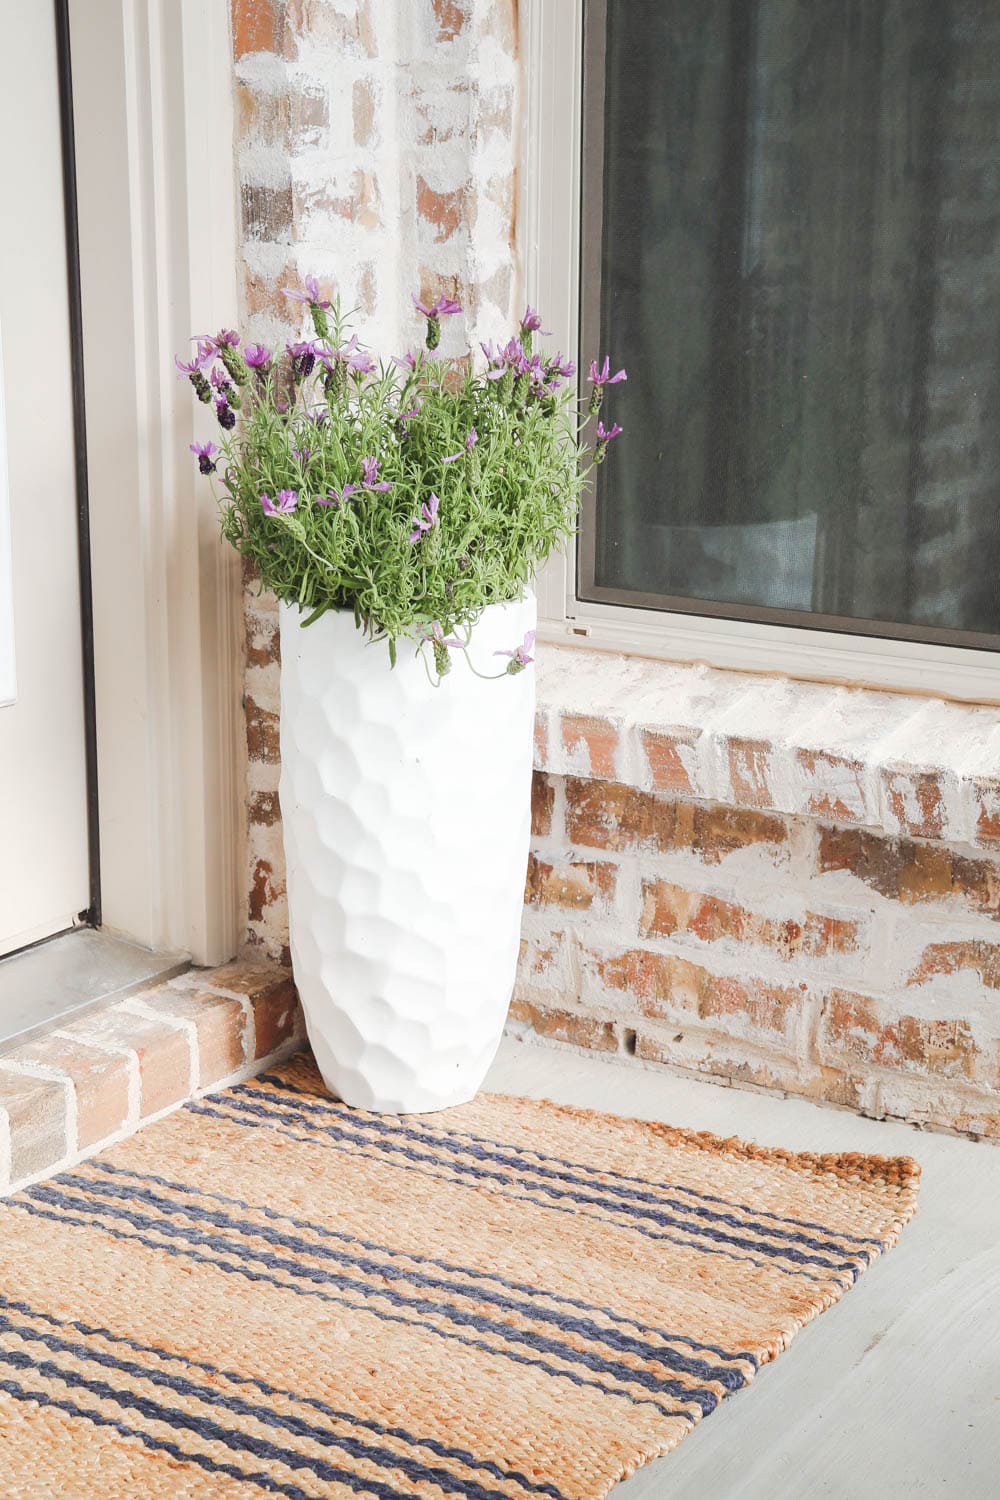 Refresh your outdoor space and update your patio for spring with these tips + a guide! #ad #AtHomeStores